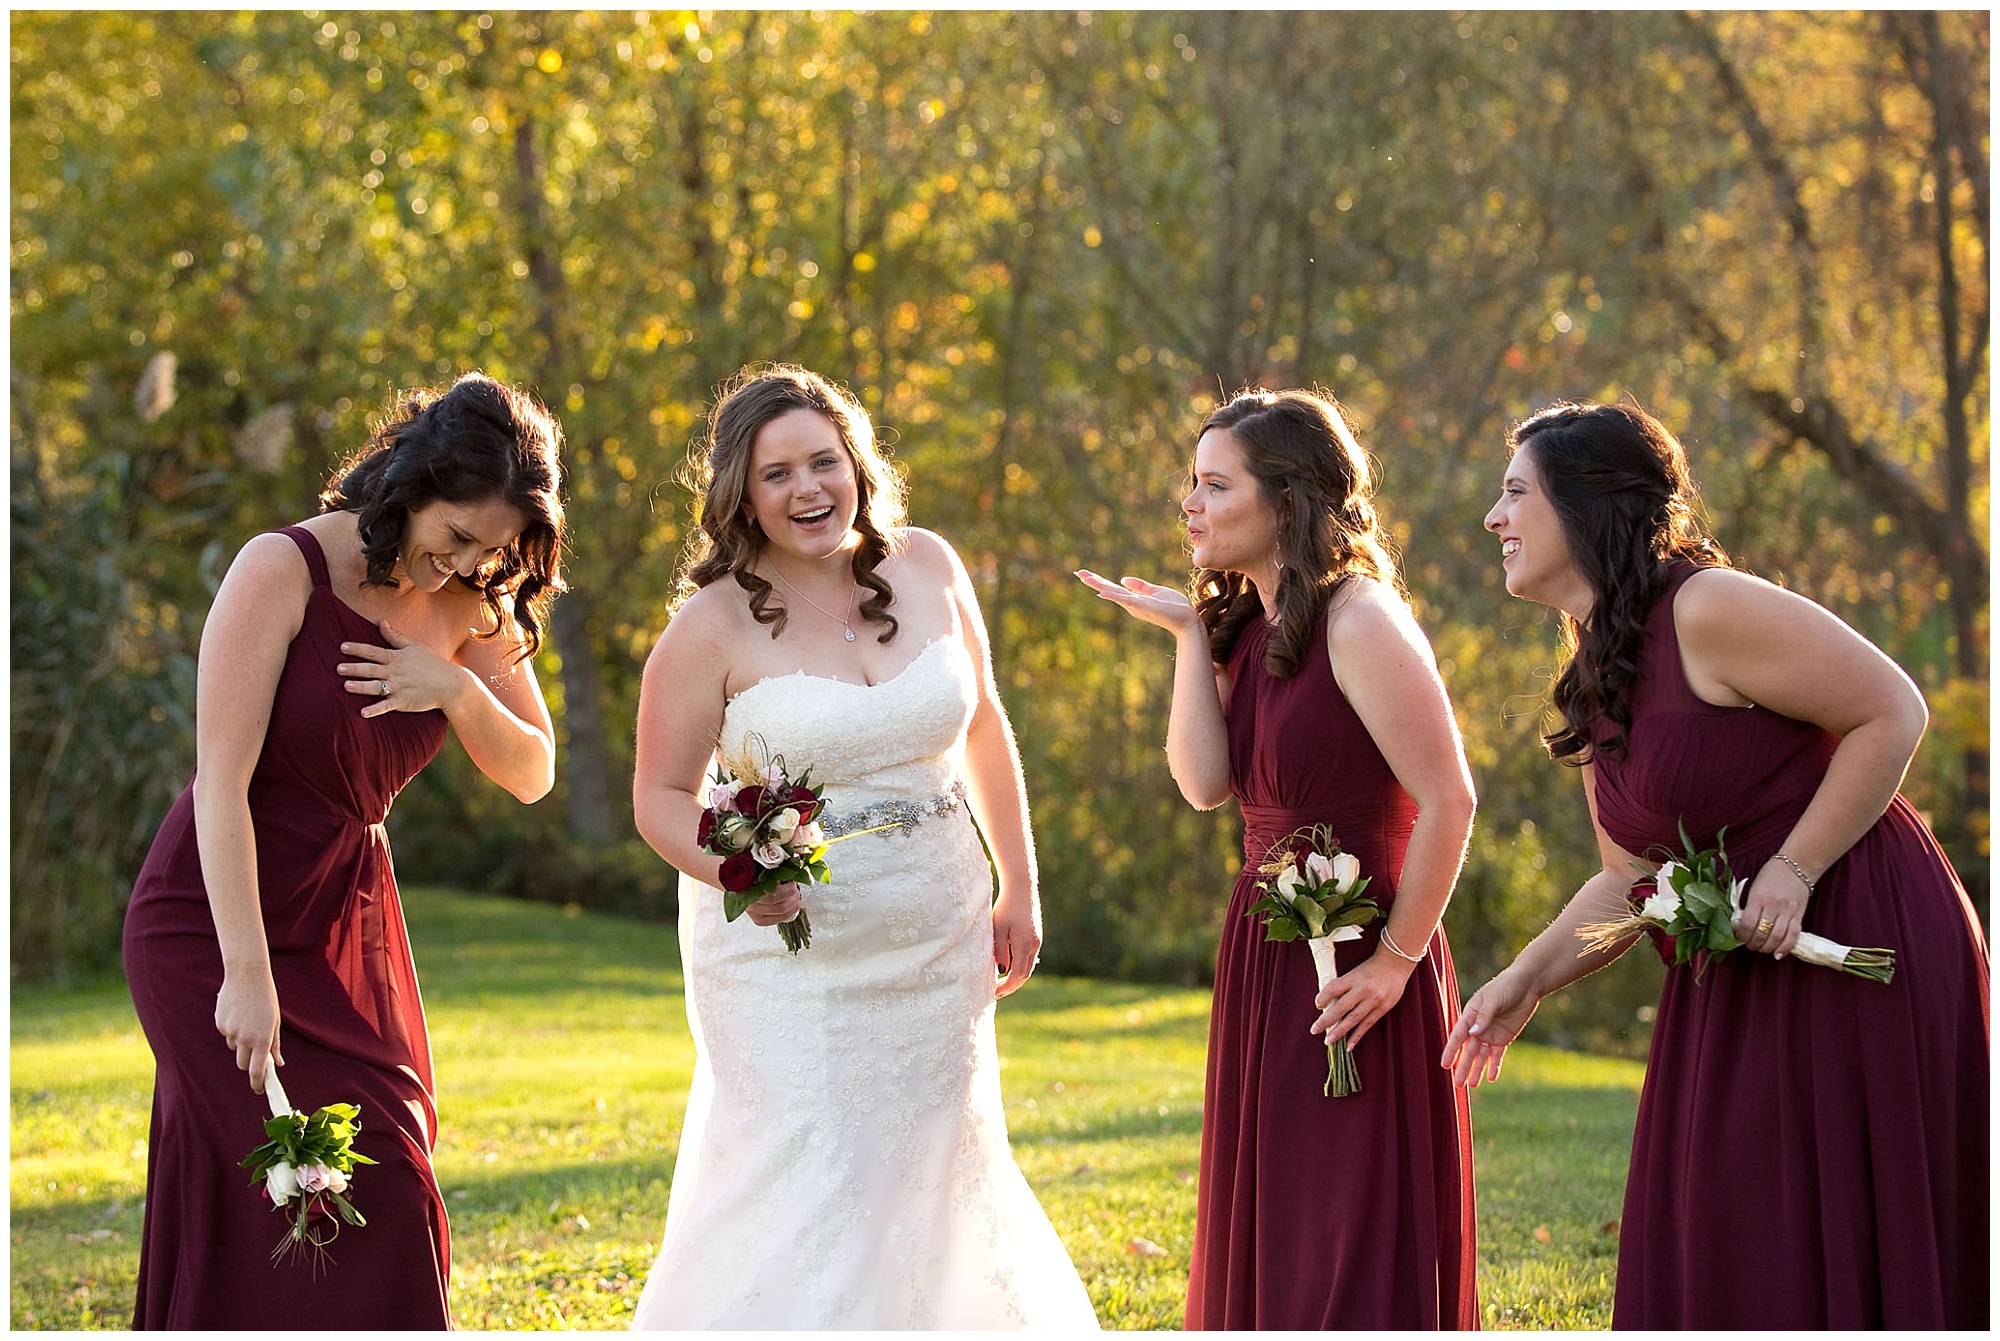 A photo of bridesmaids blowing kisses to the bride and laughing.